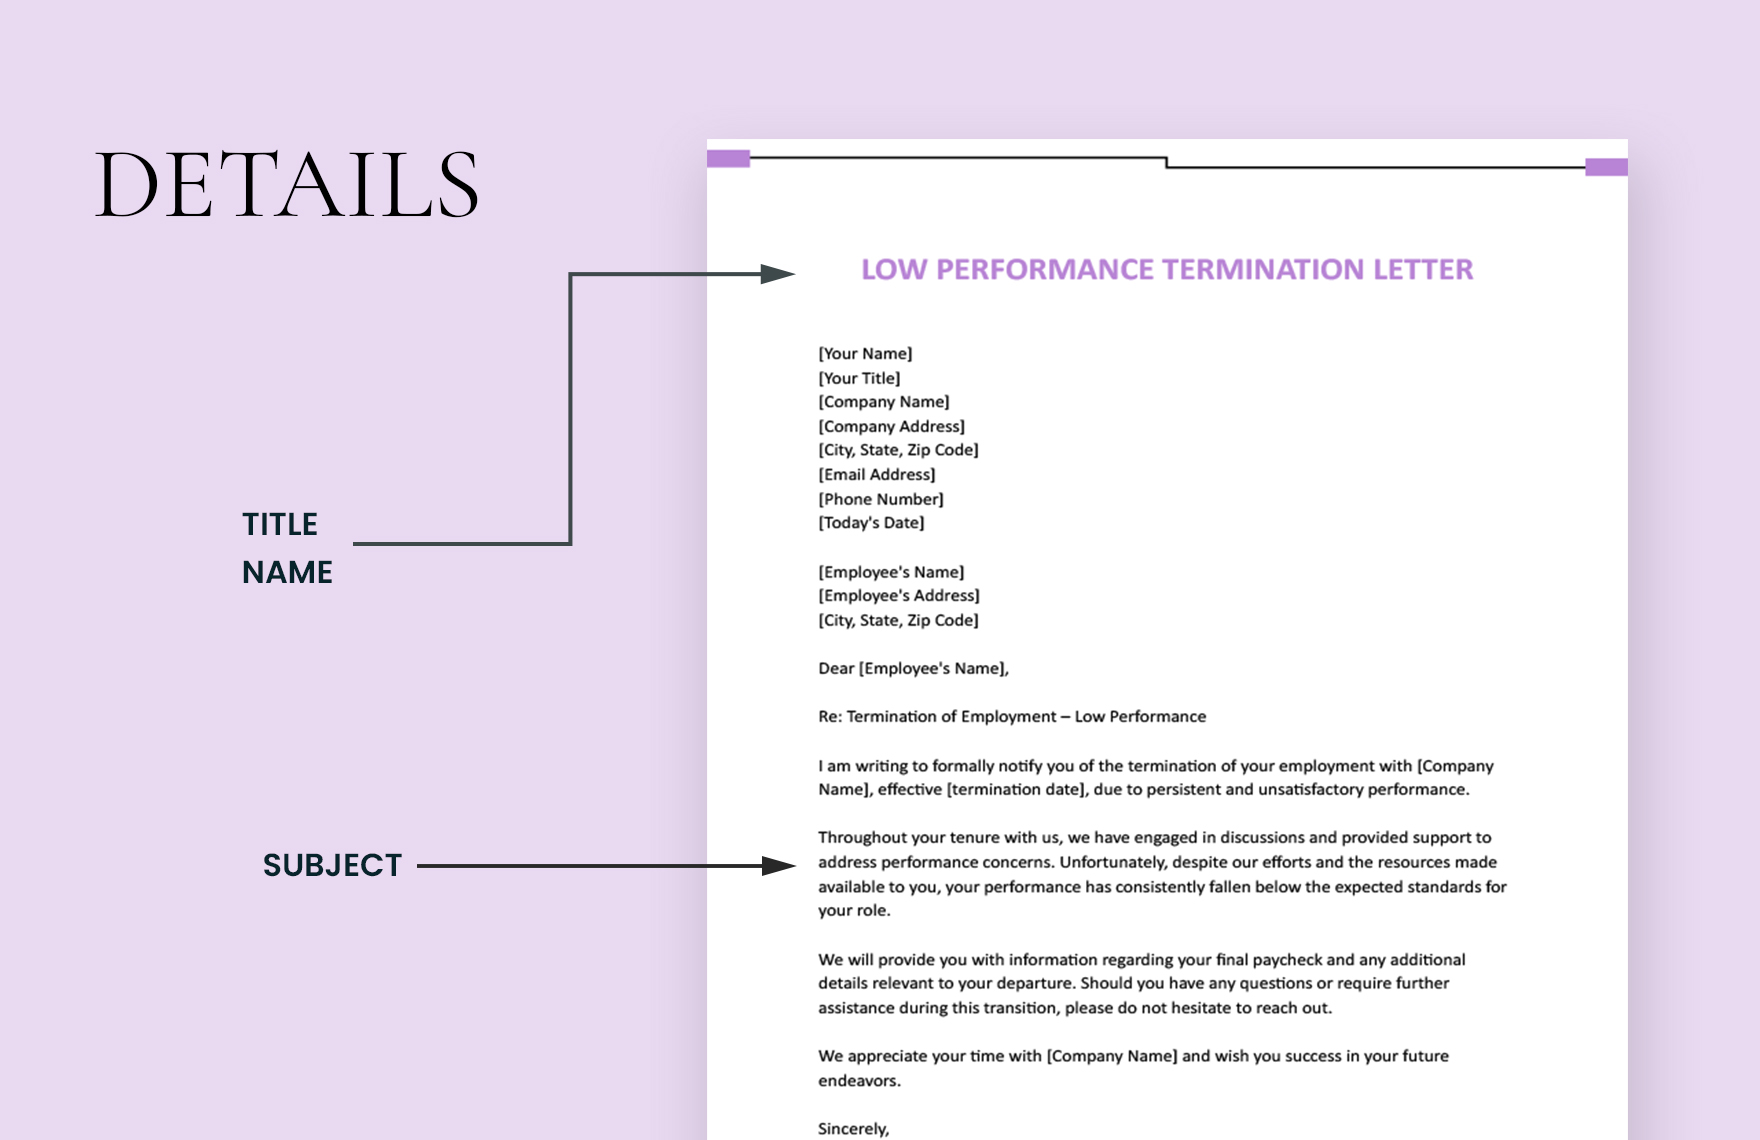 Low Performance Termination Letter